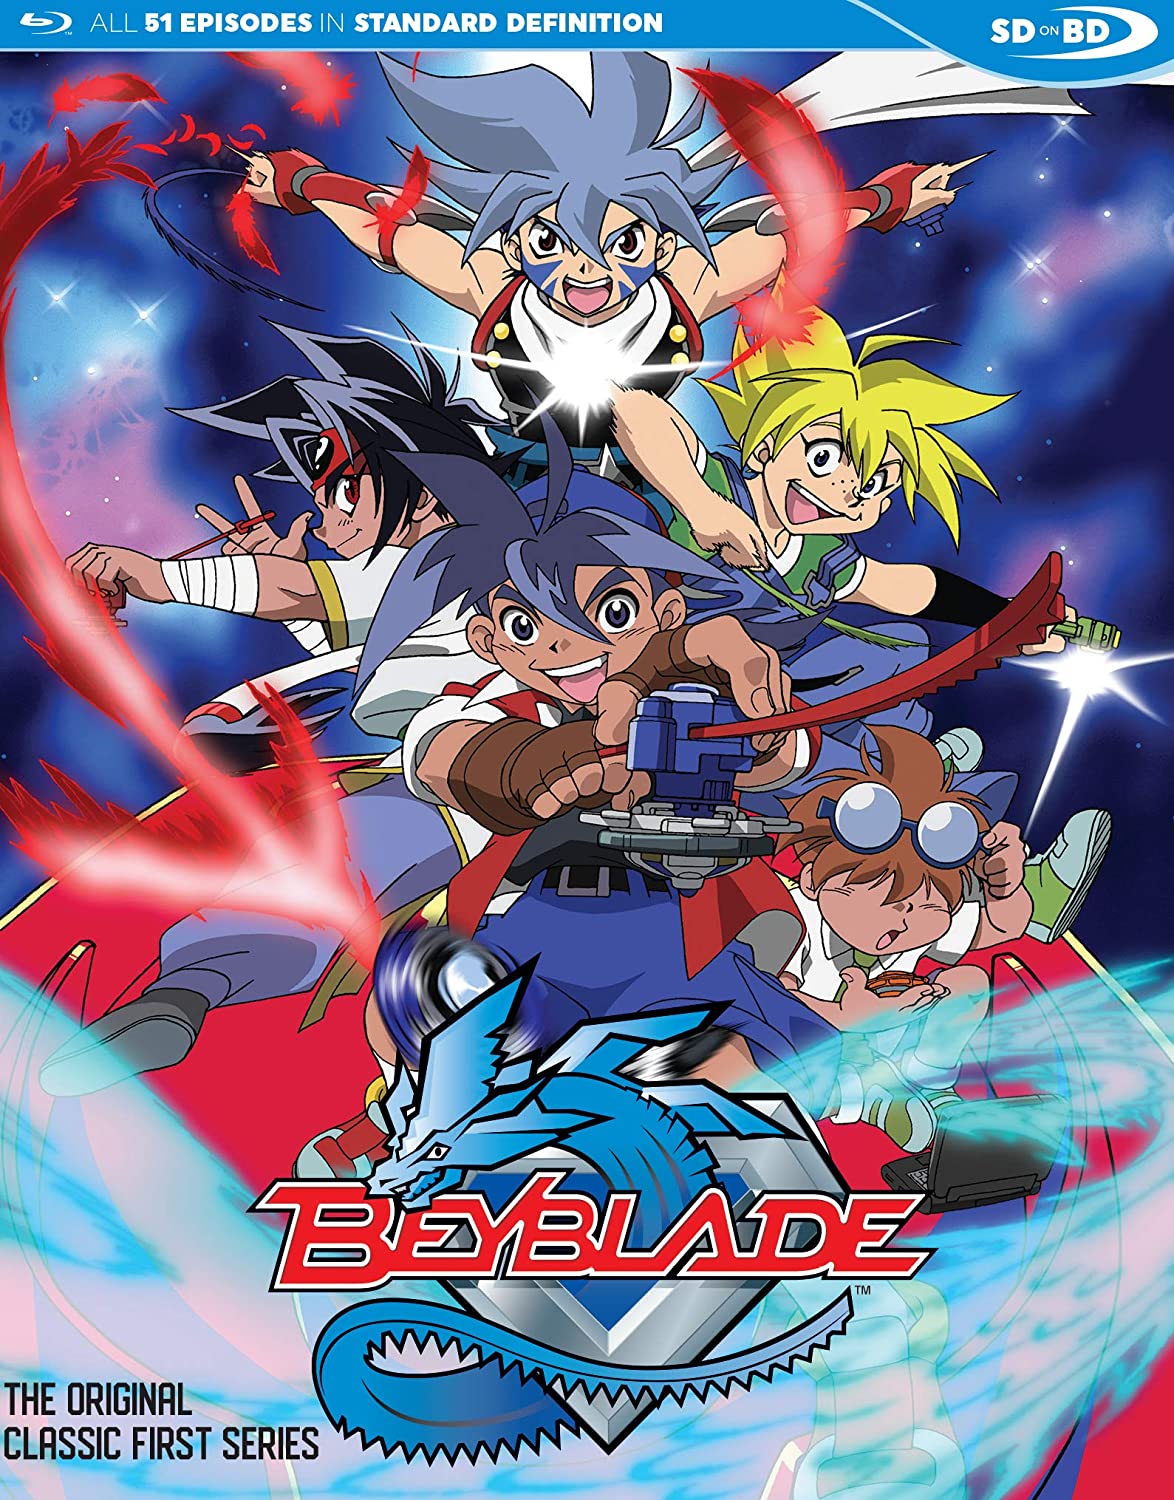 win beyblades for free